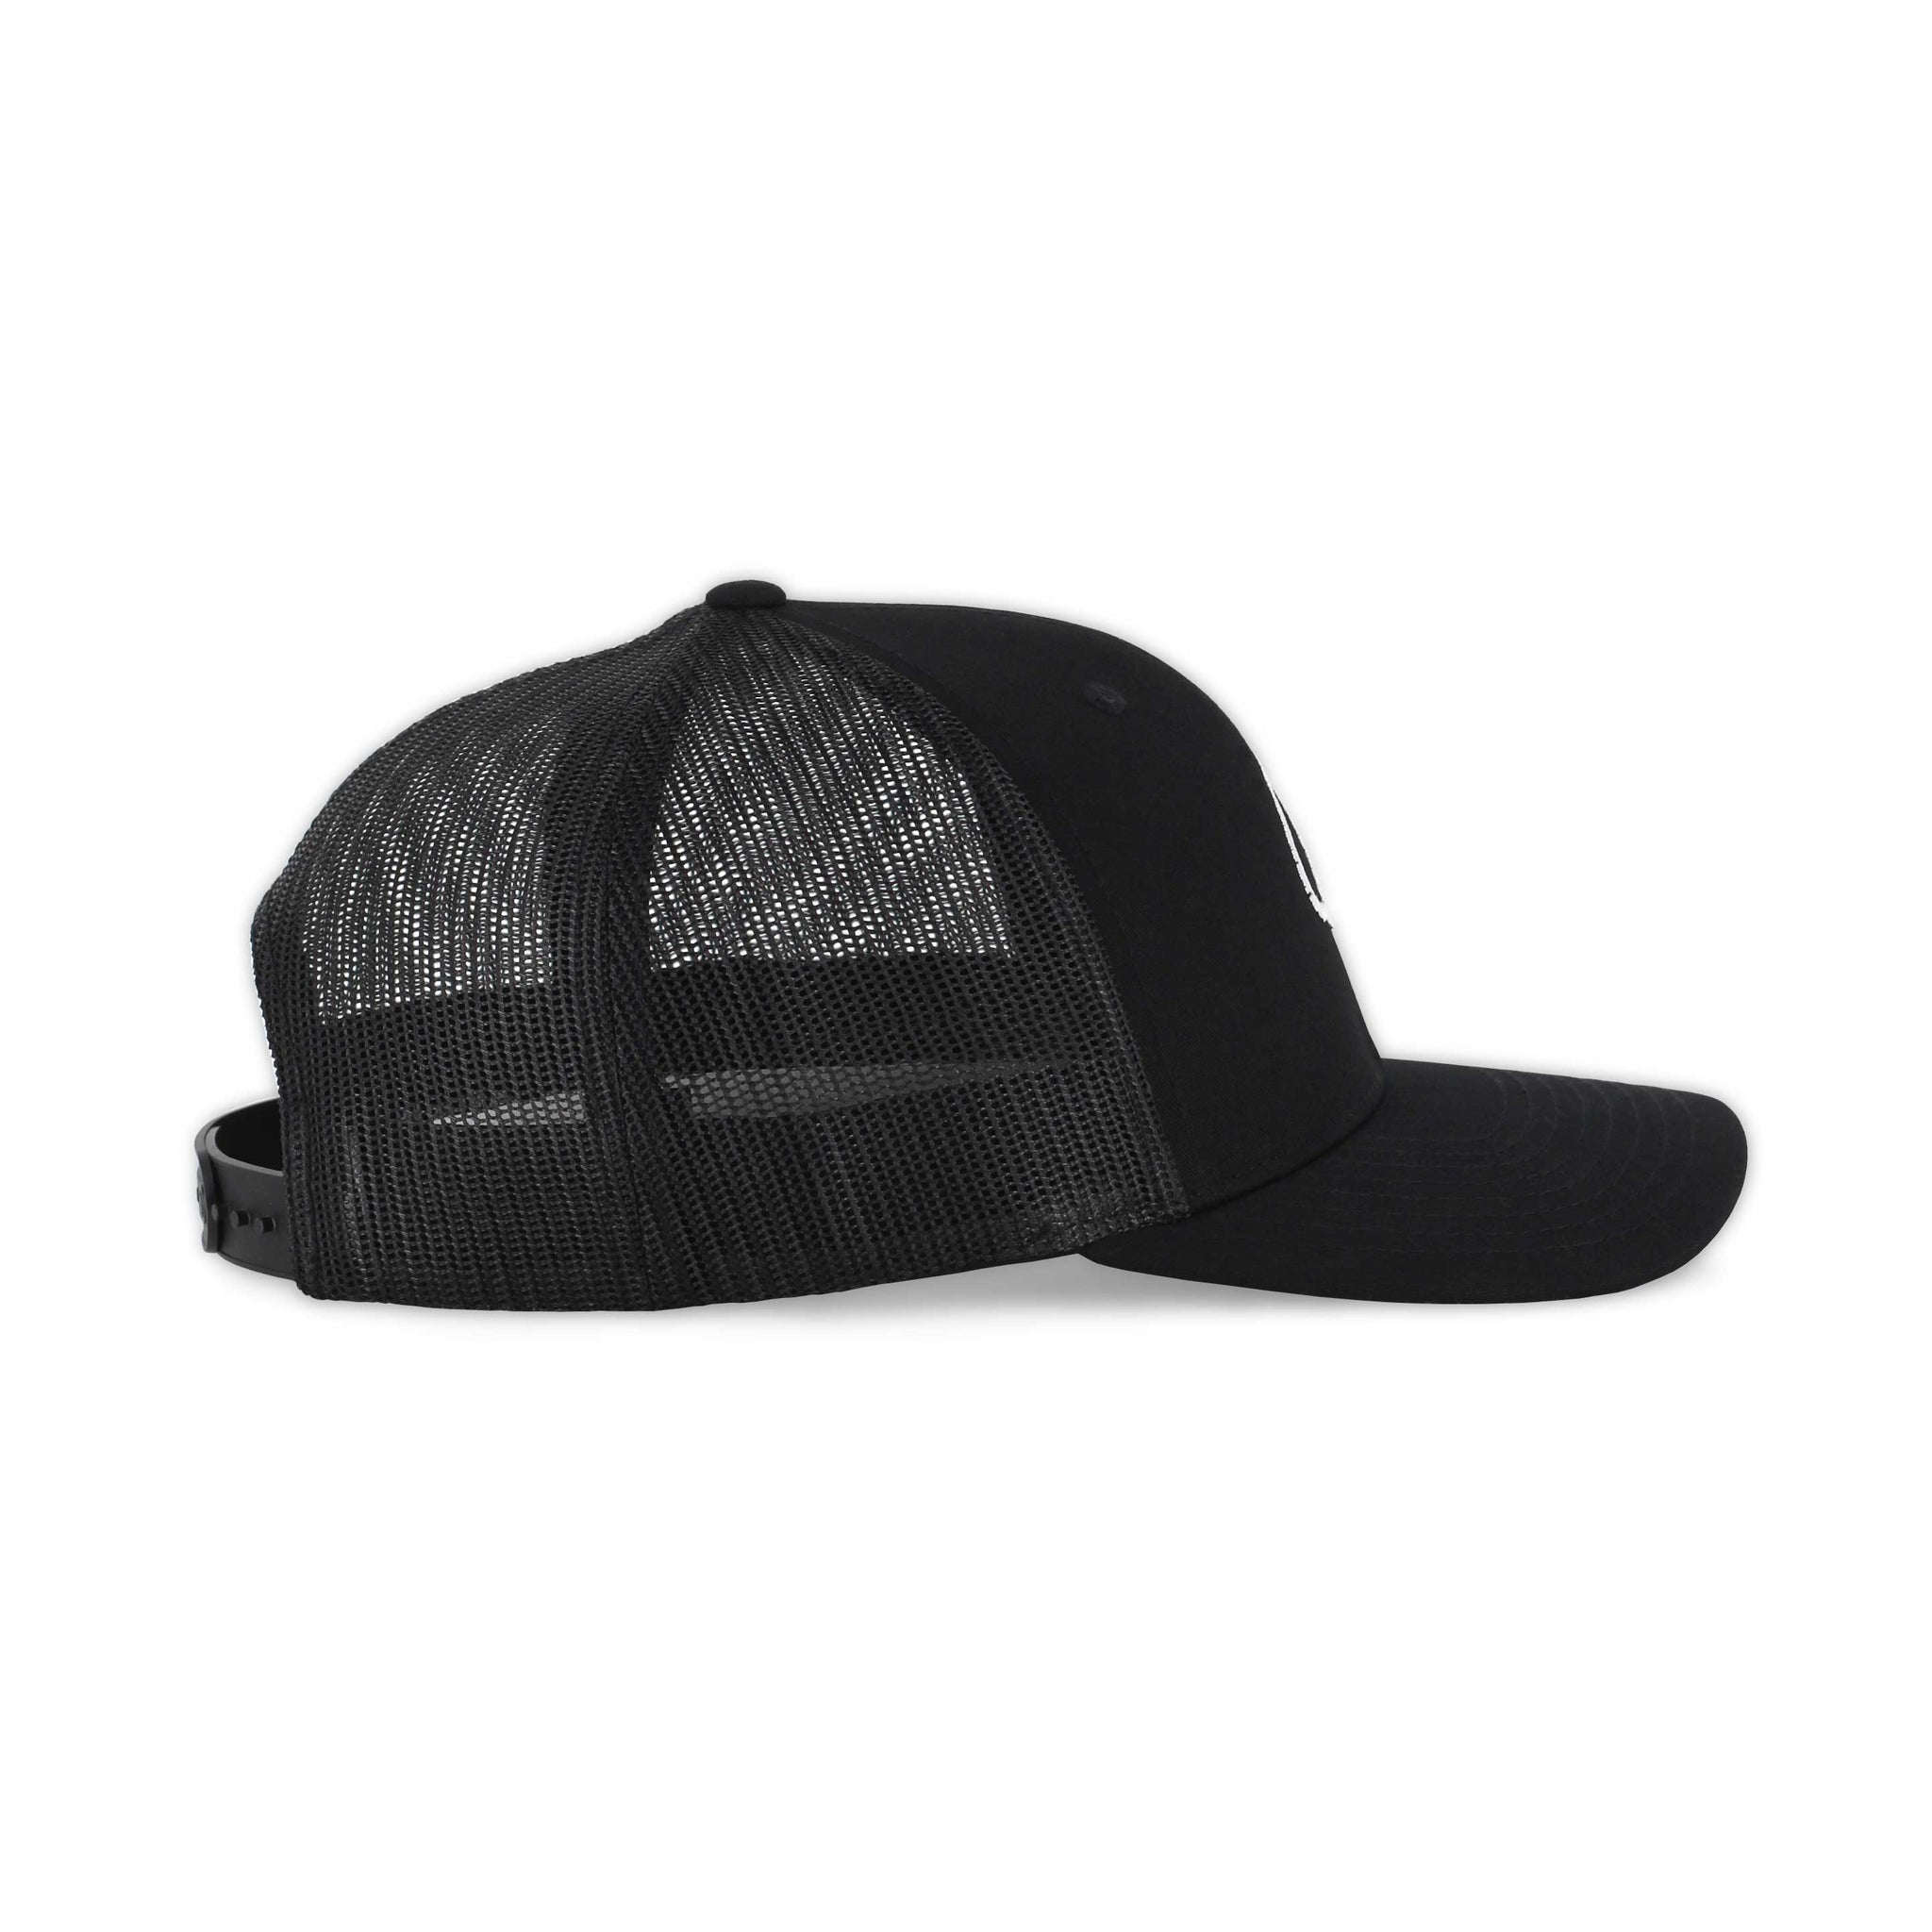 Black Fitted Hat with White Leaf